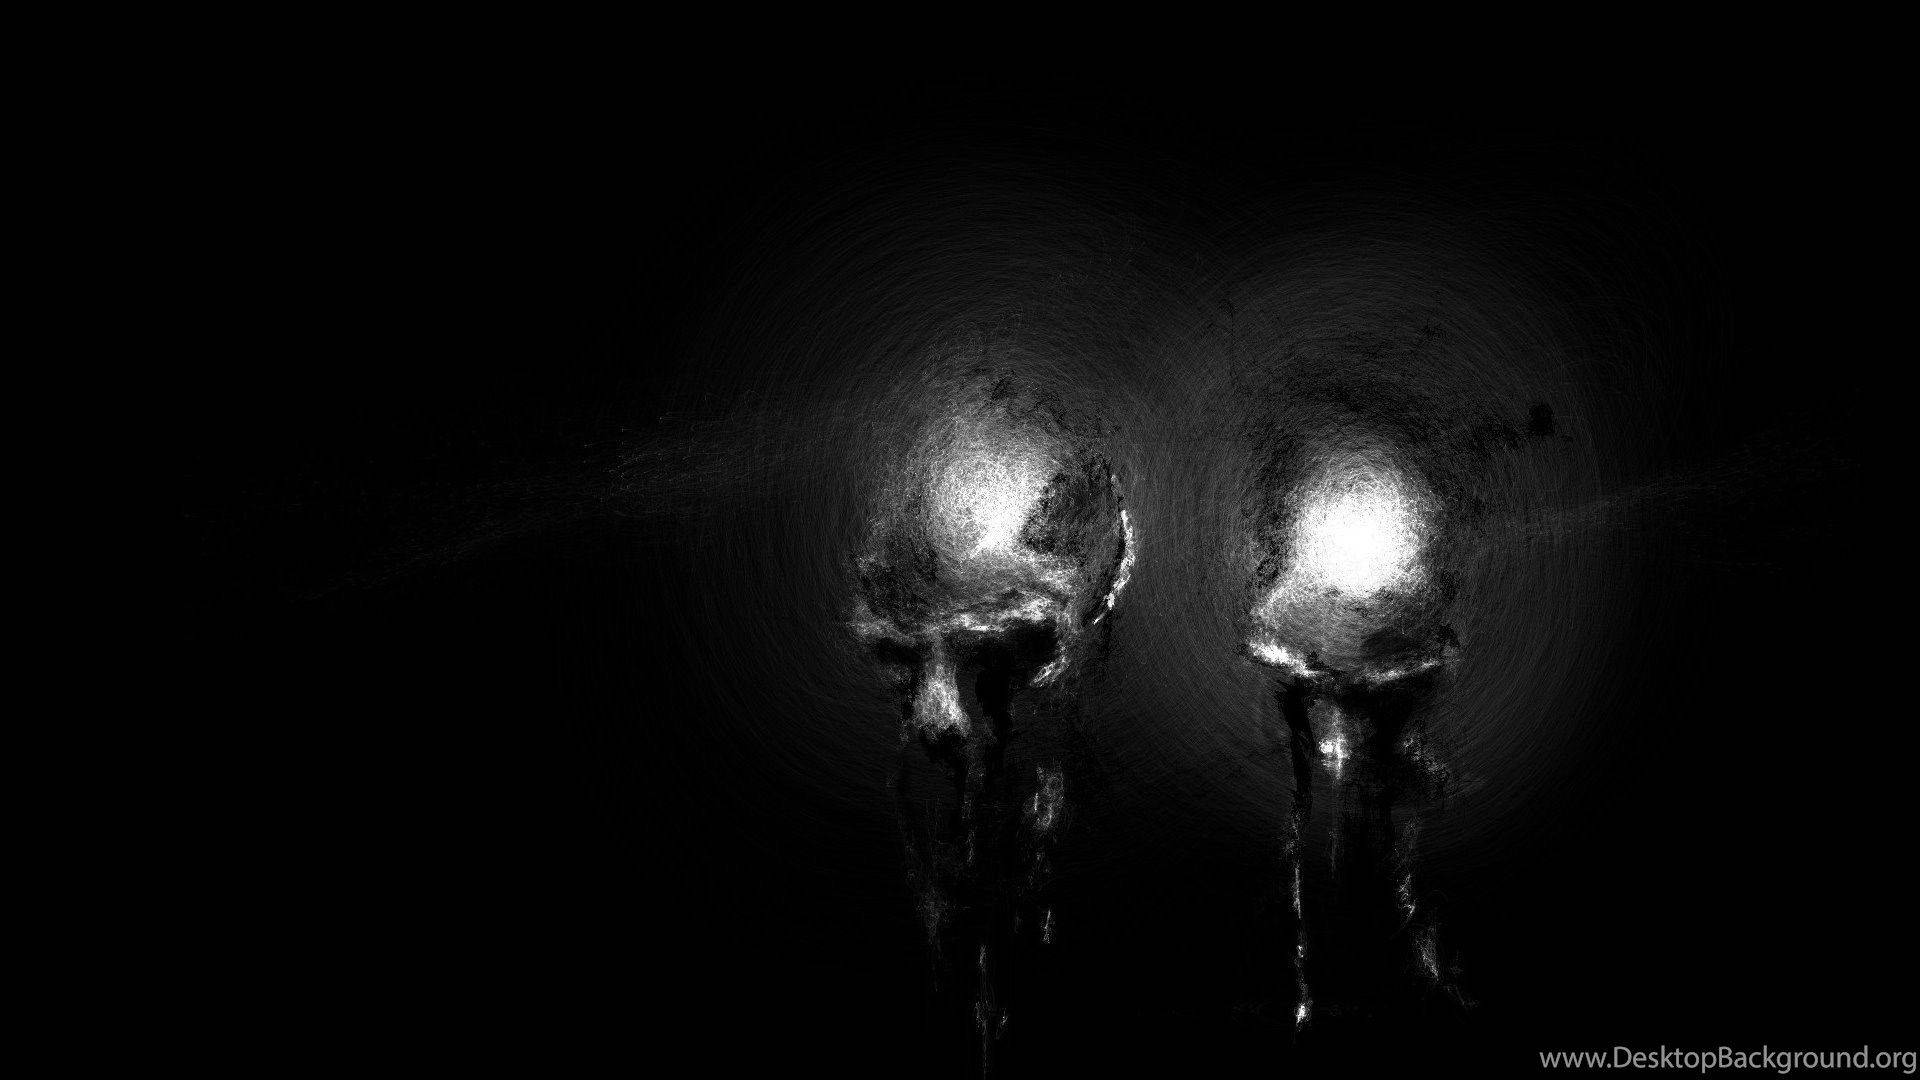 Spooky and Unsettling - Creepy Heads in Darkness Wallpaper